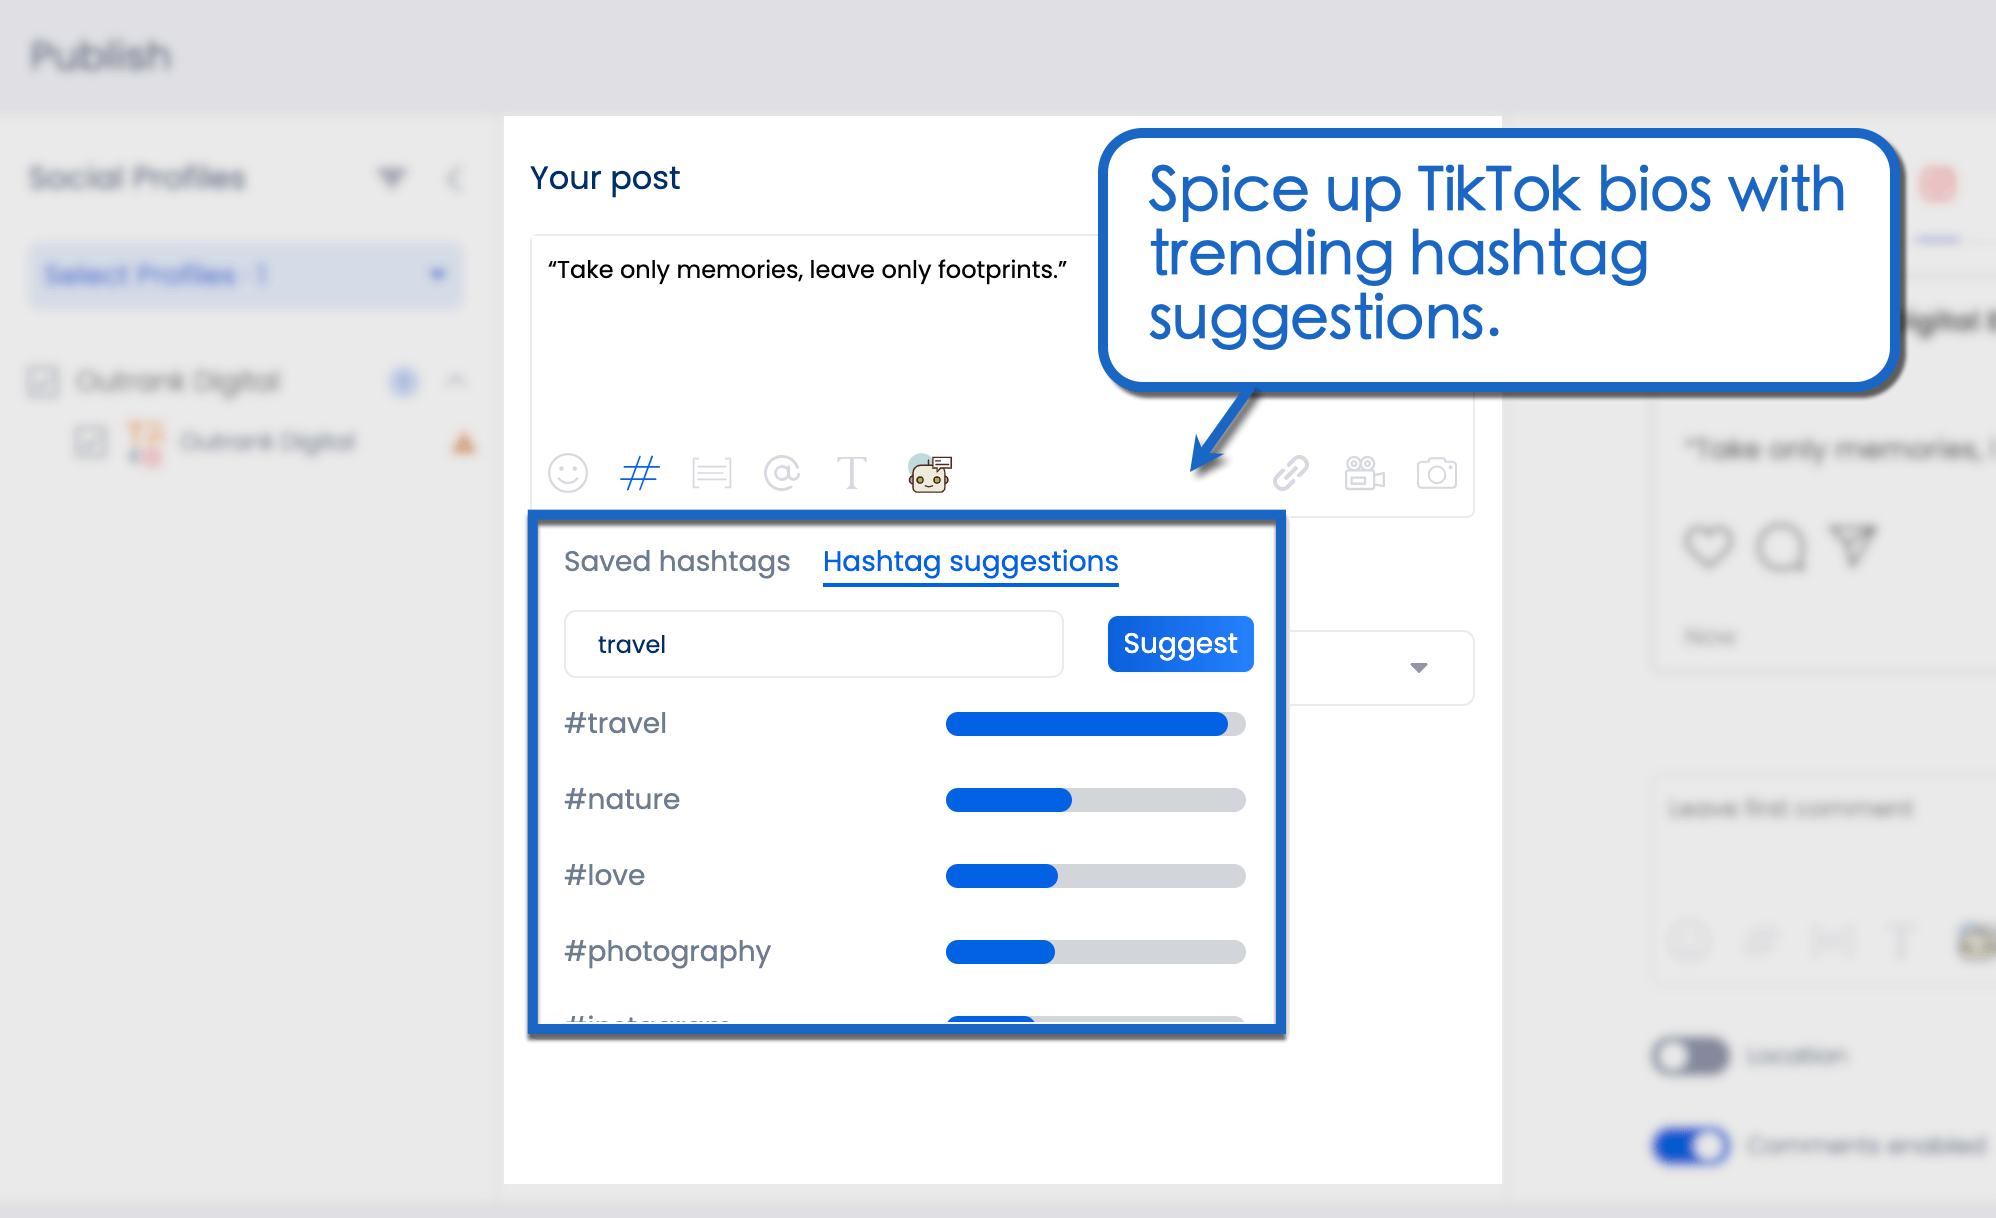 Search for trending hashtags.